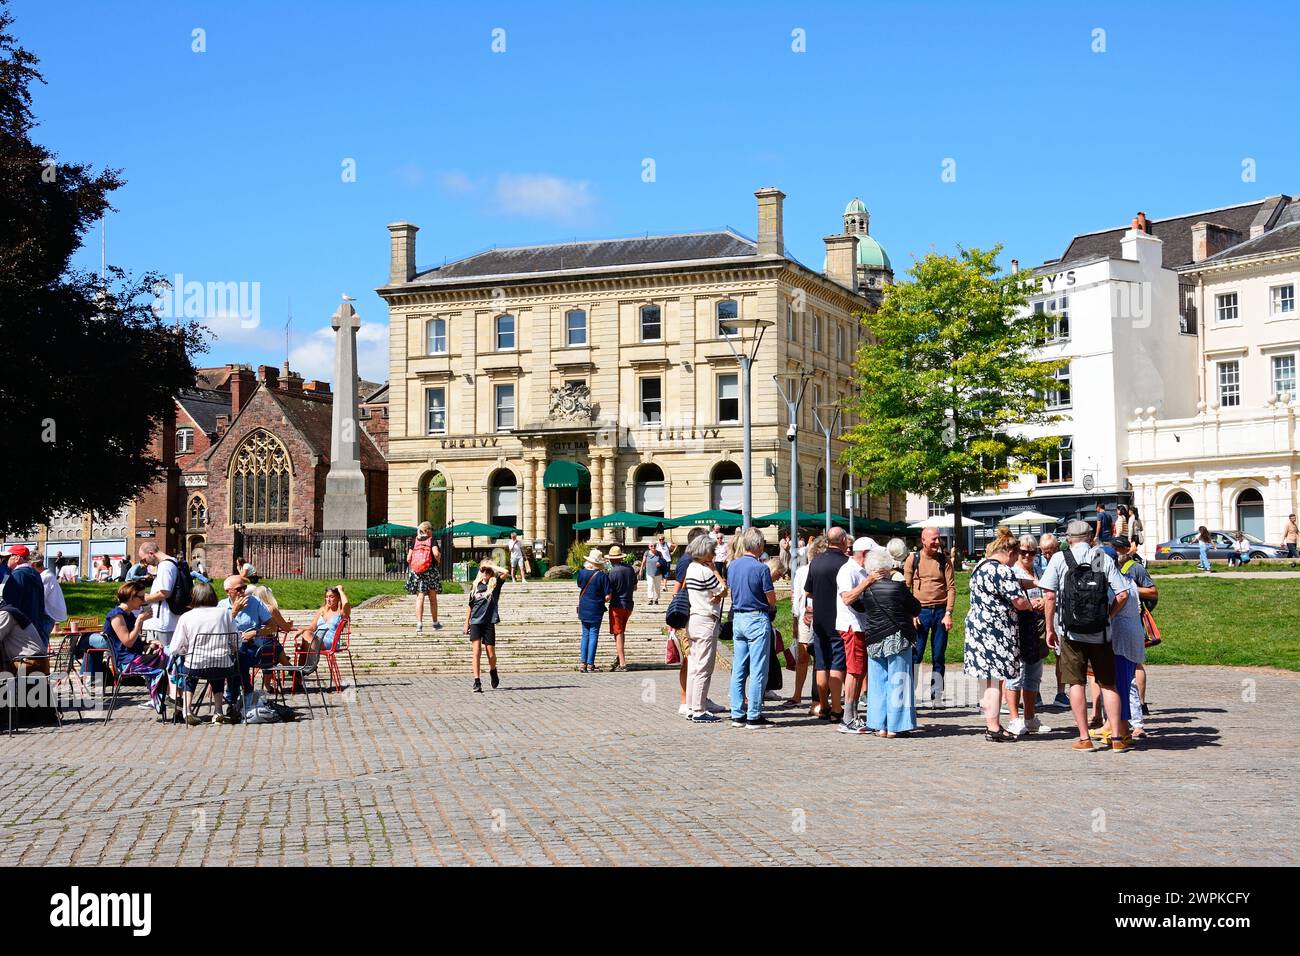 View of The Ivy Bistro and St Pentrock church along Cathedral Yard with tourists in the foreground, Exeter, Devon, UK, Europe. Stock Photo